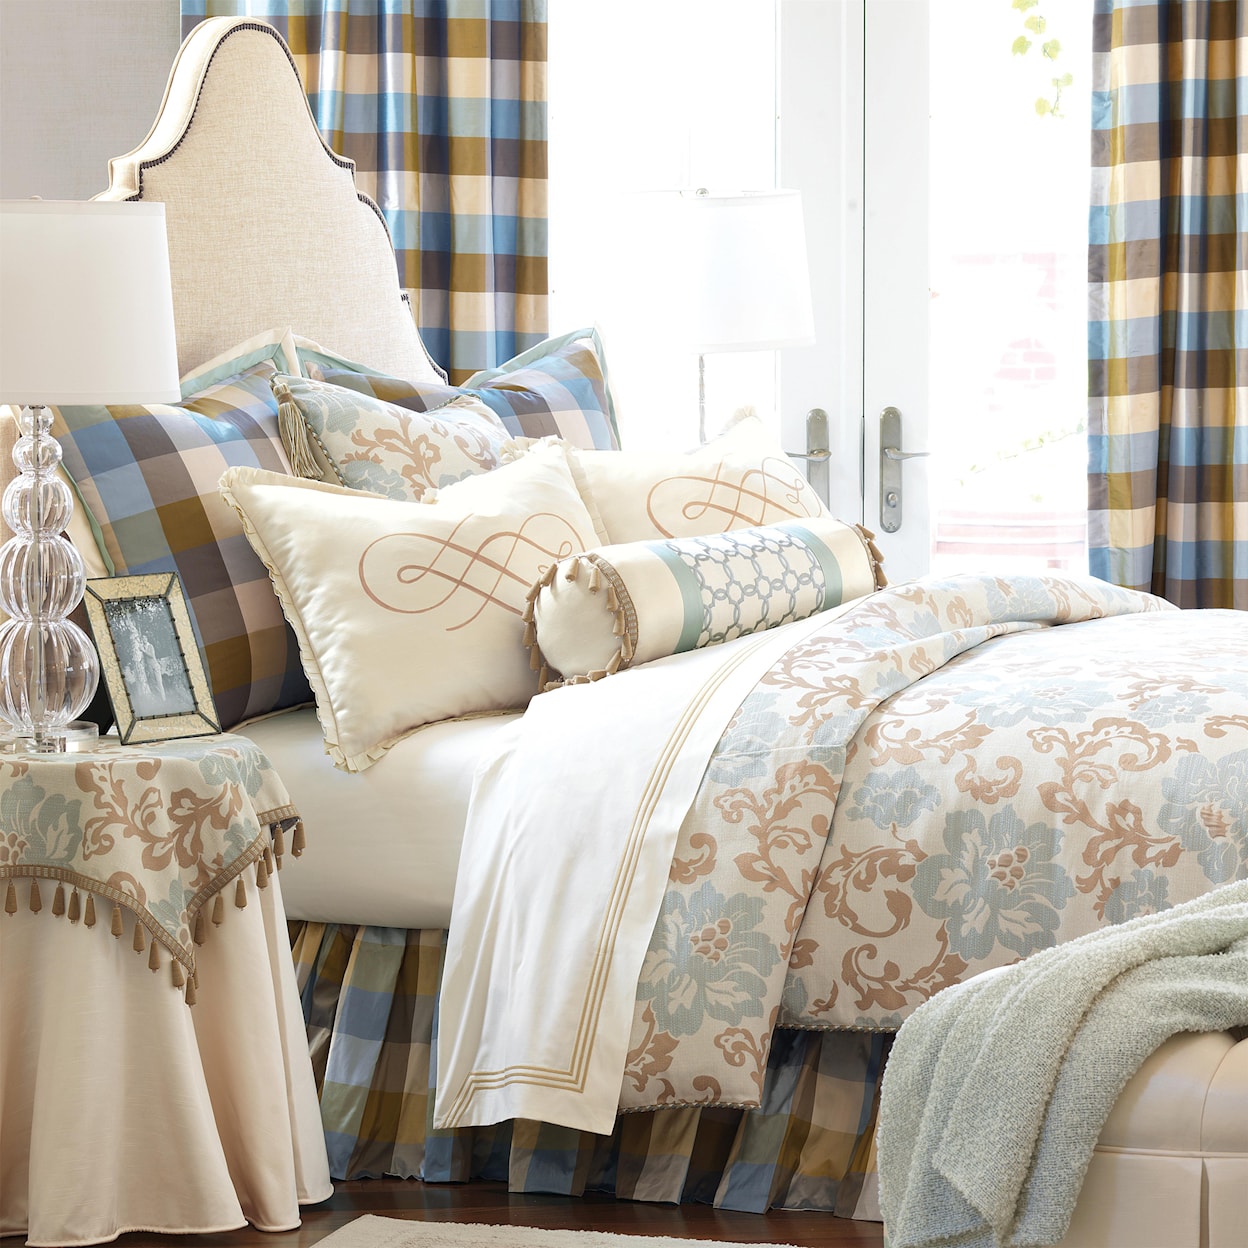 Eastern Accents Kinsey Cal King Bedset